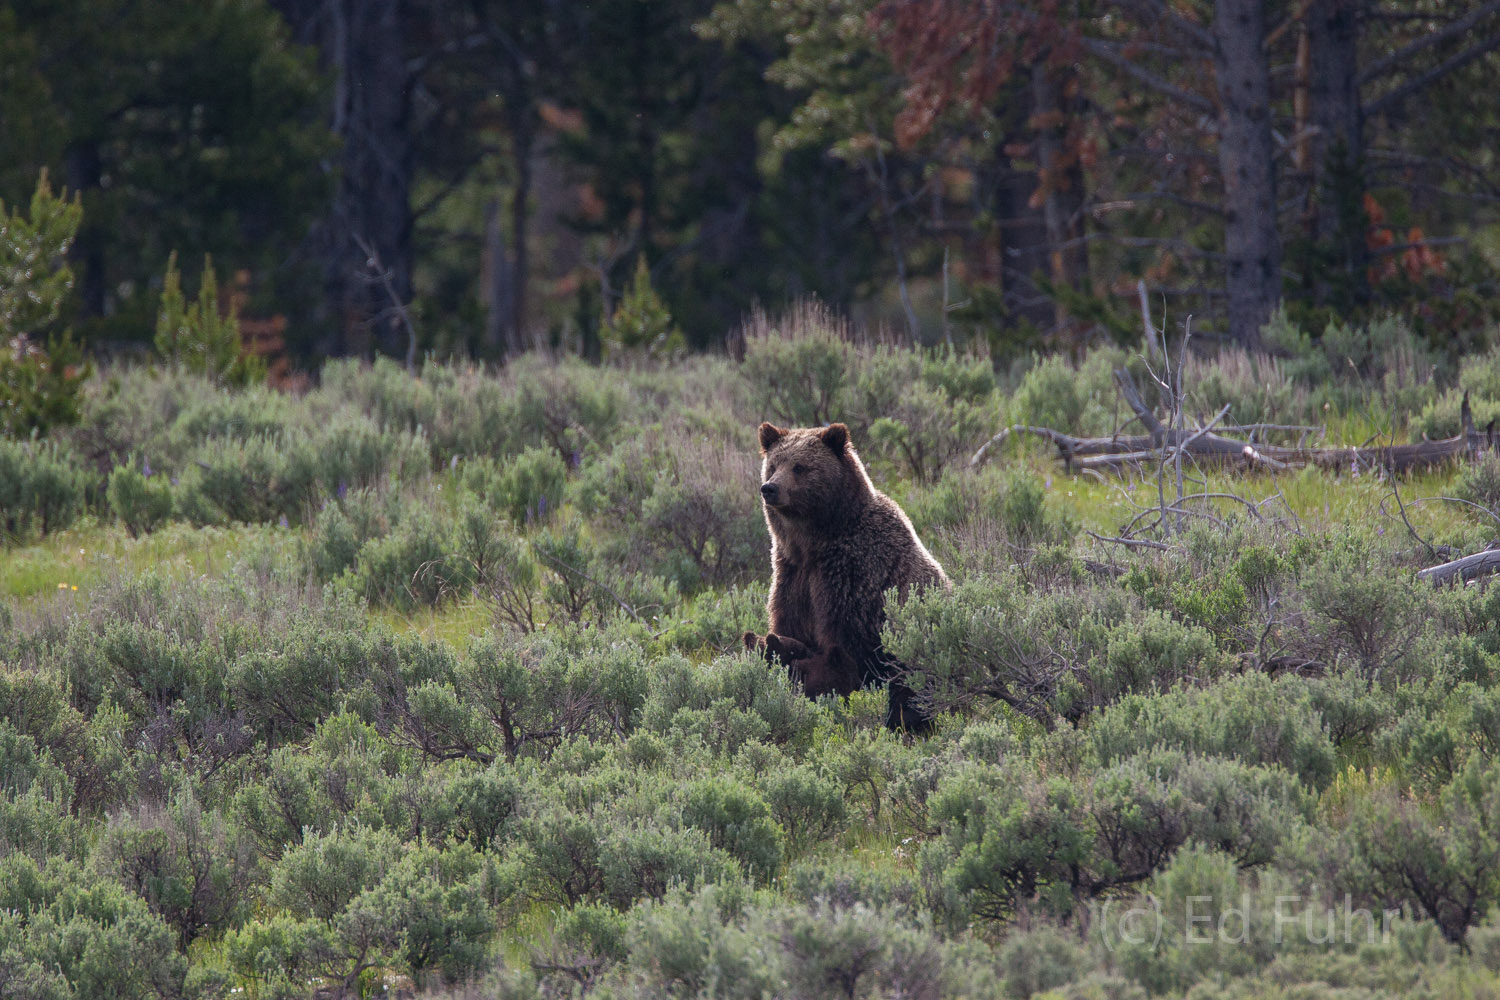 A large grizzly sow nurses her cubs while keeping an eye out for danger.